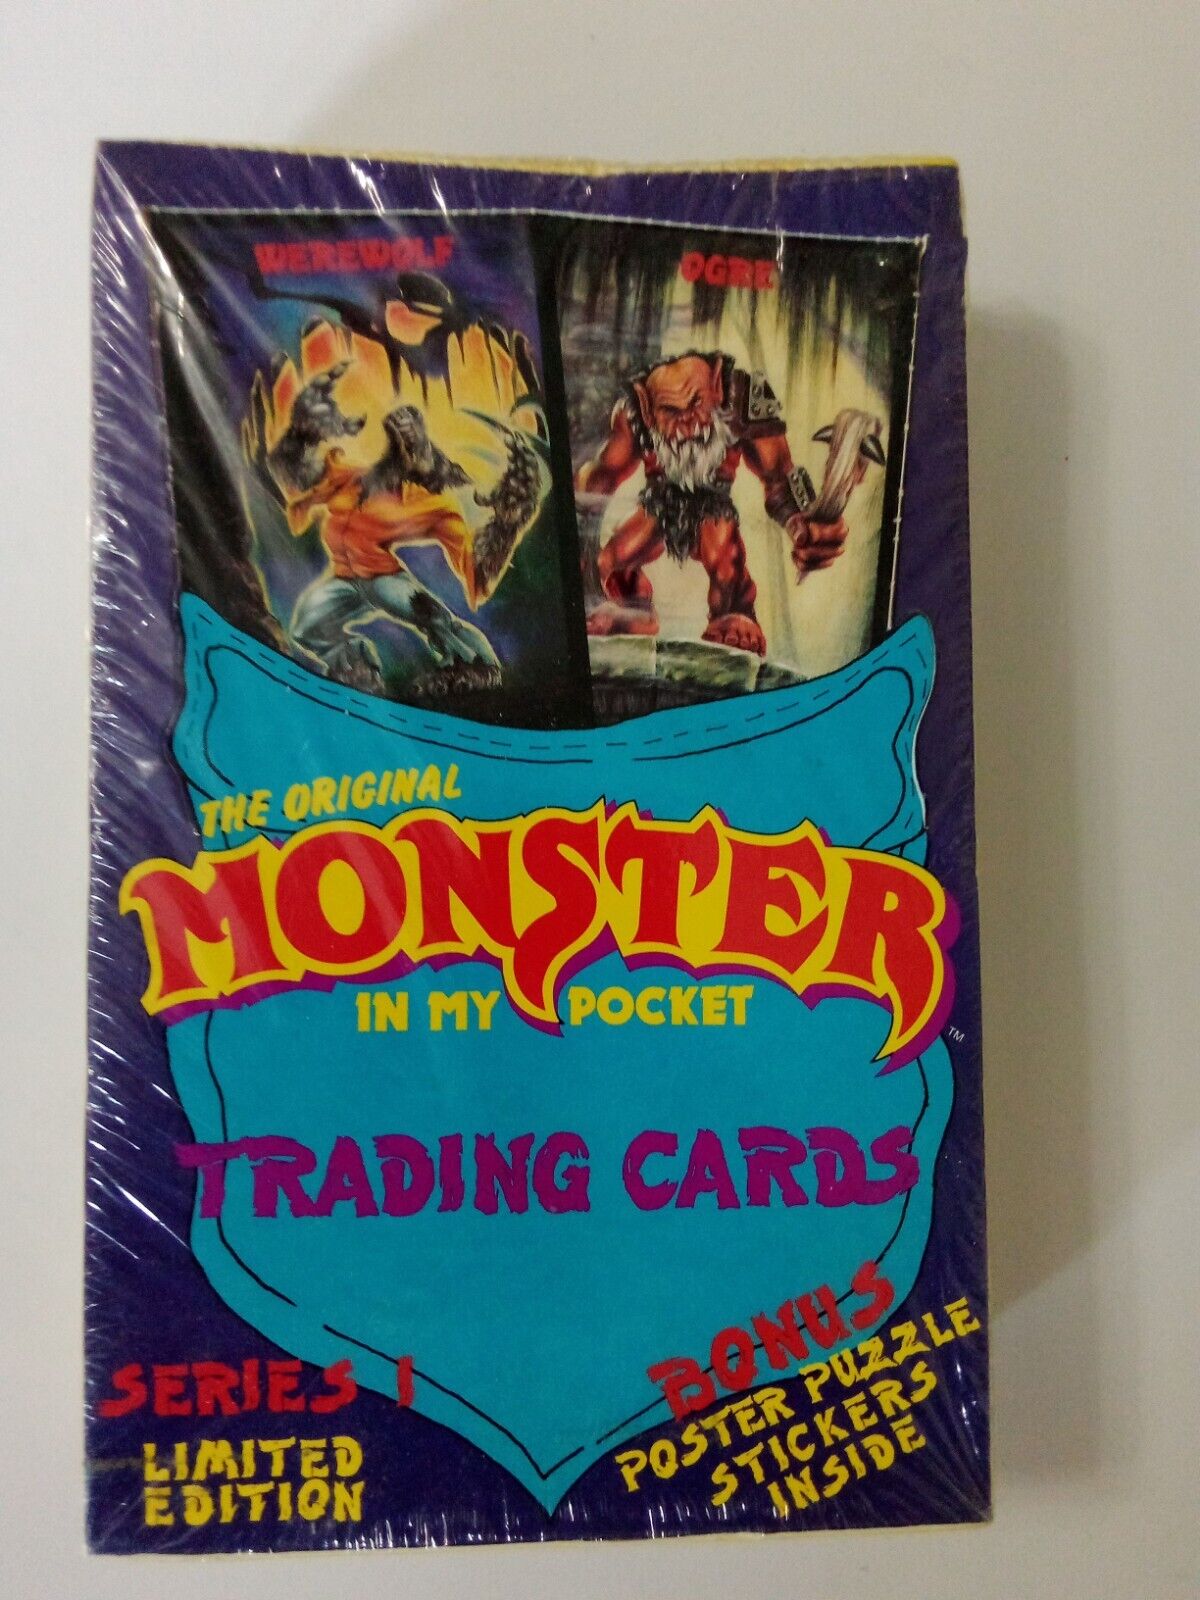 1991 MONSTER IN MY POCKET TRADING CARDS 48 PACKS PUZZLE & STICKERS UNOPENED BOX